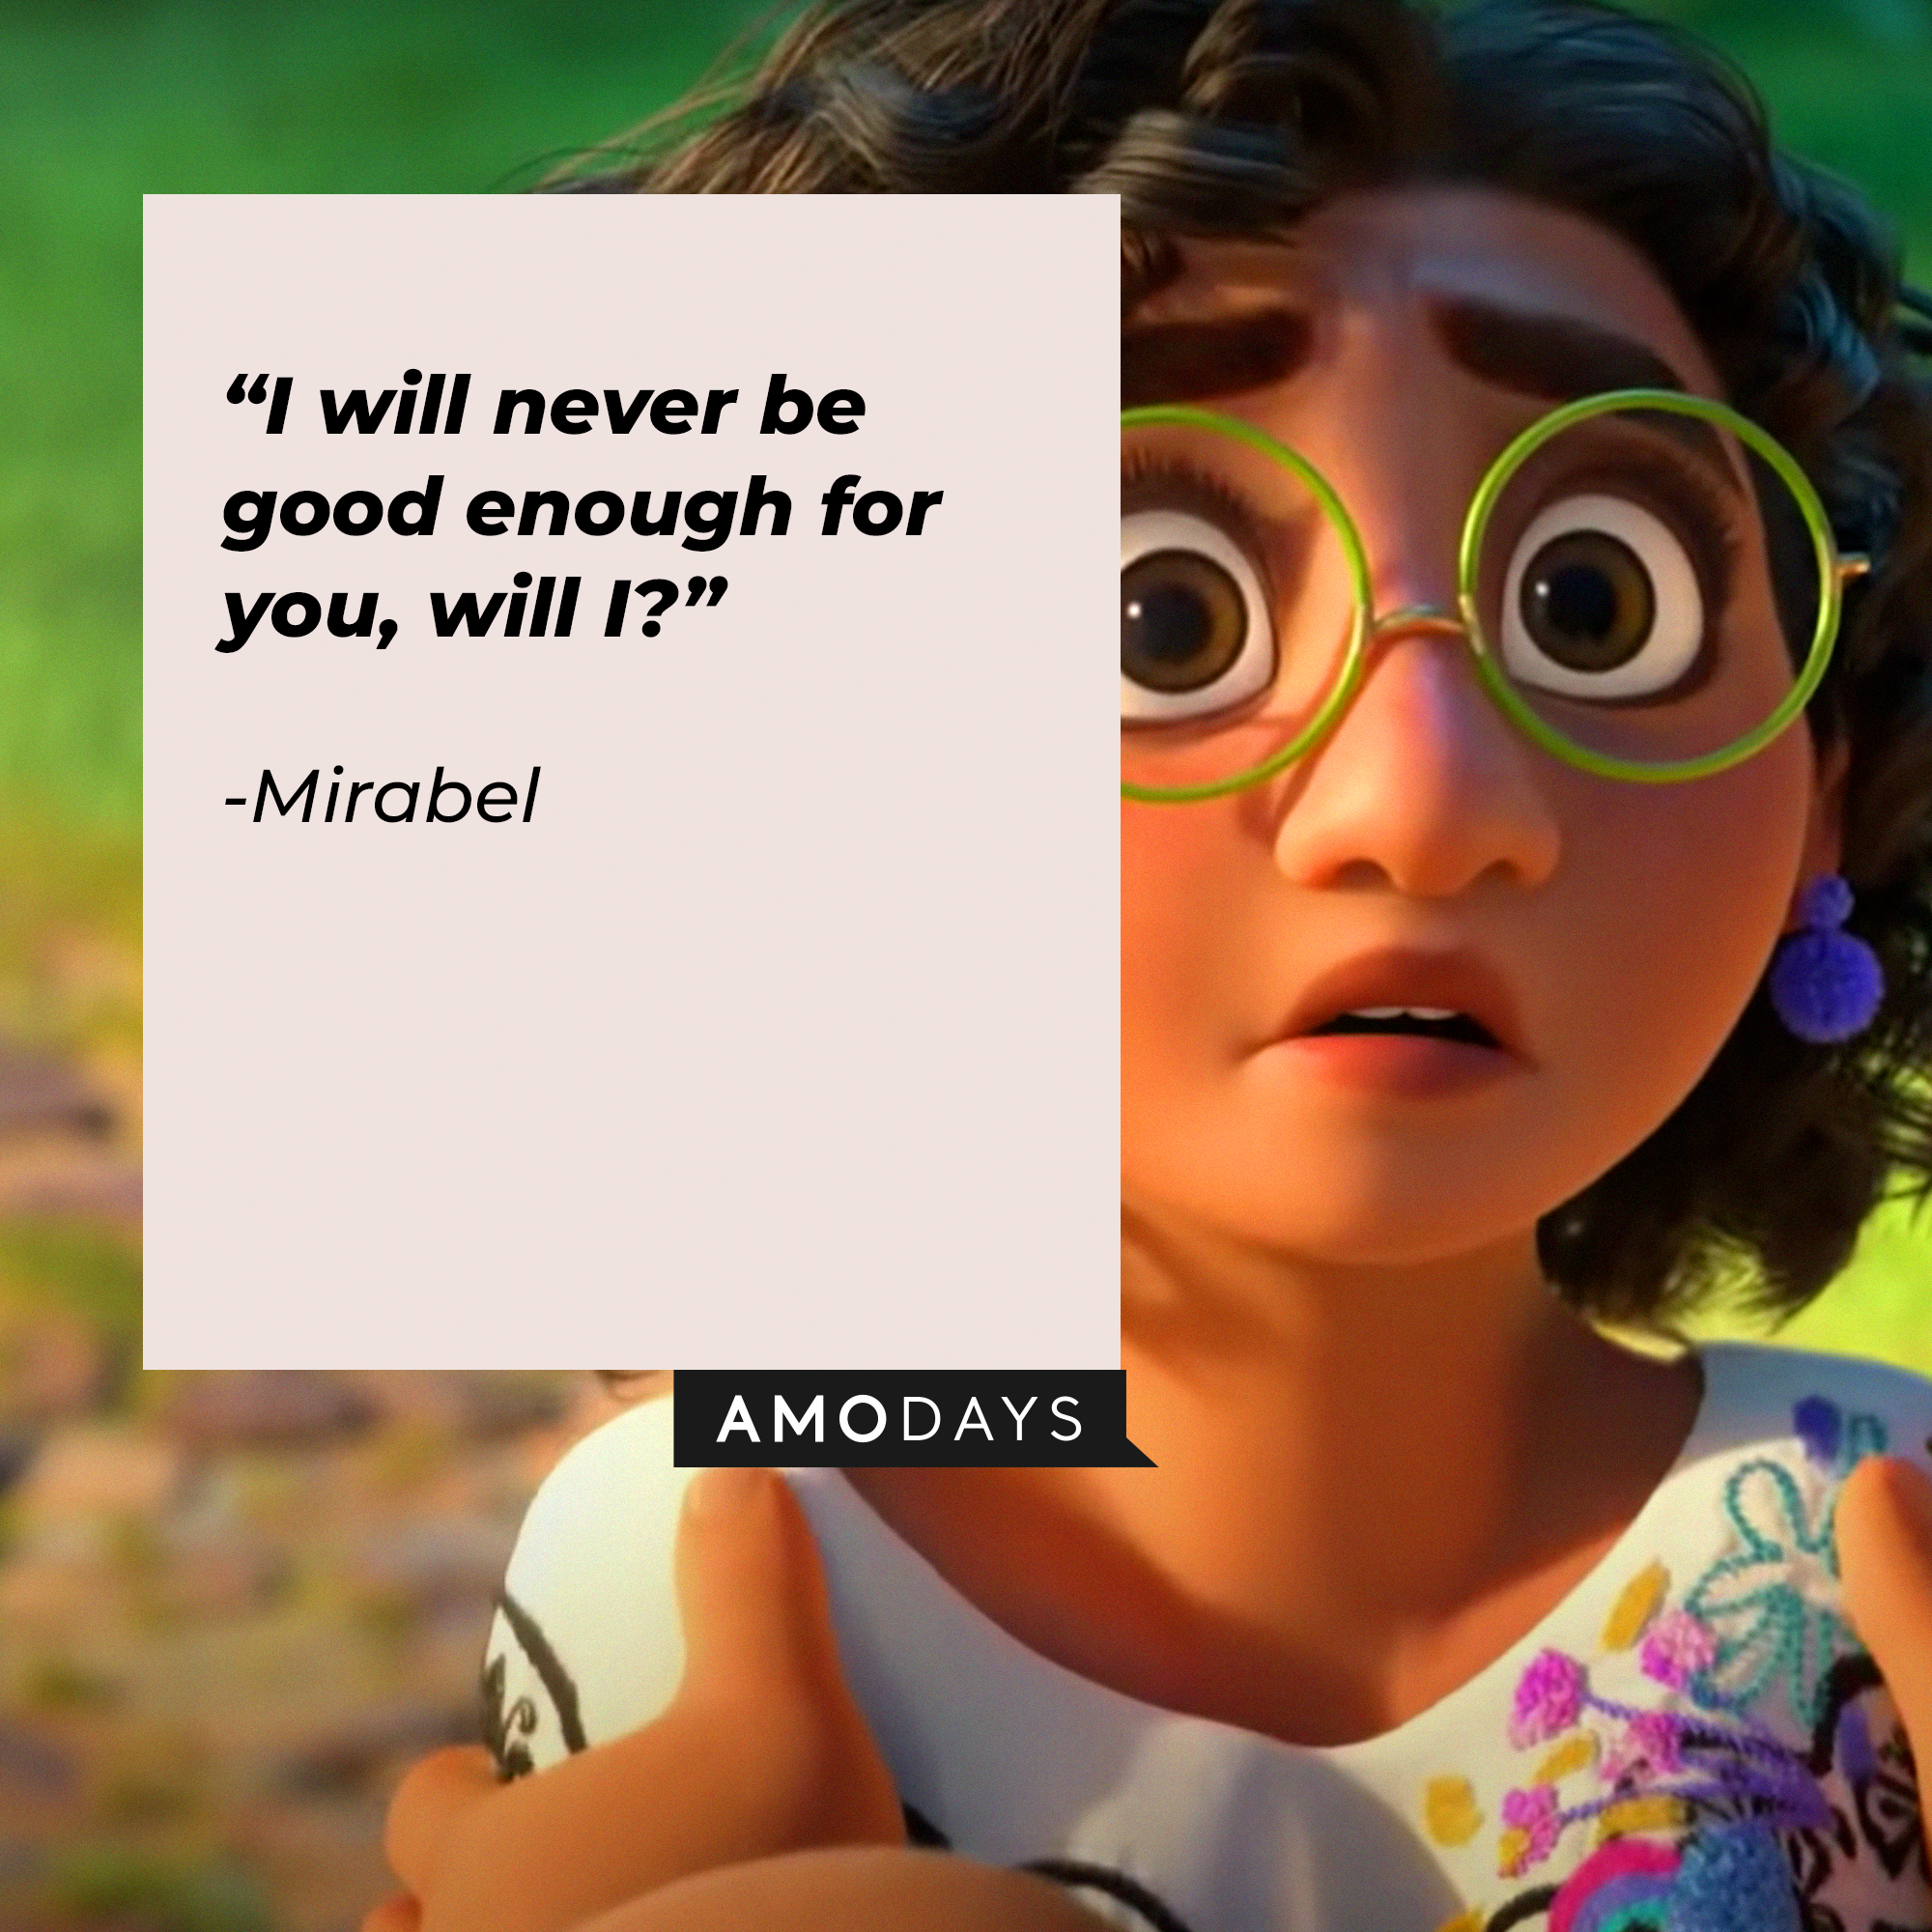 An image of Mirabel, with her quote: "I will never be good enough for you, will I?" | Source: Youtube.com/DisneyMusicVEVO